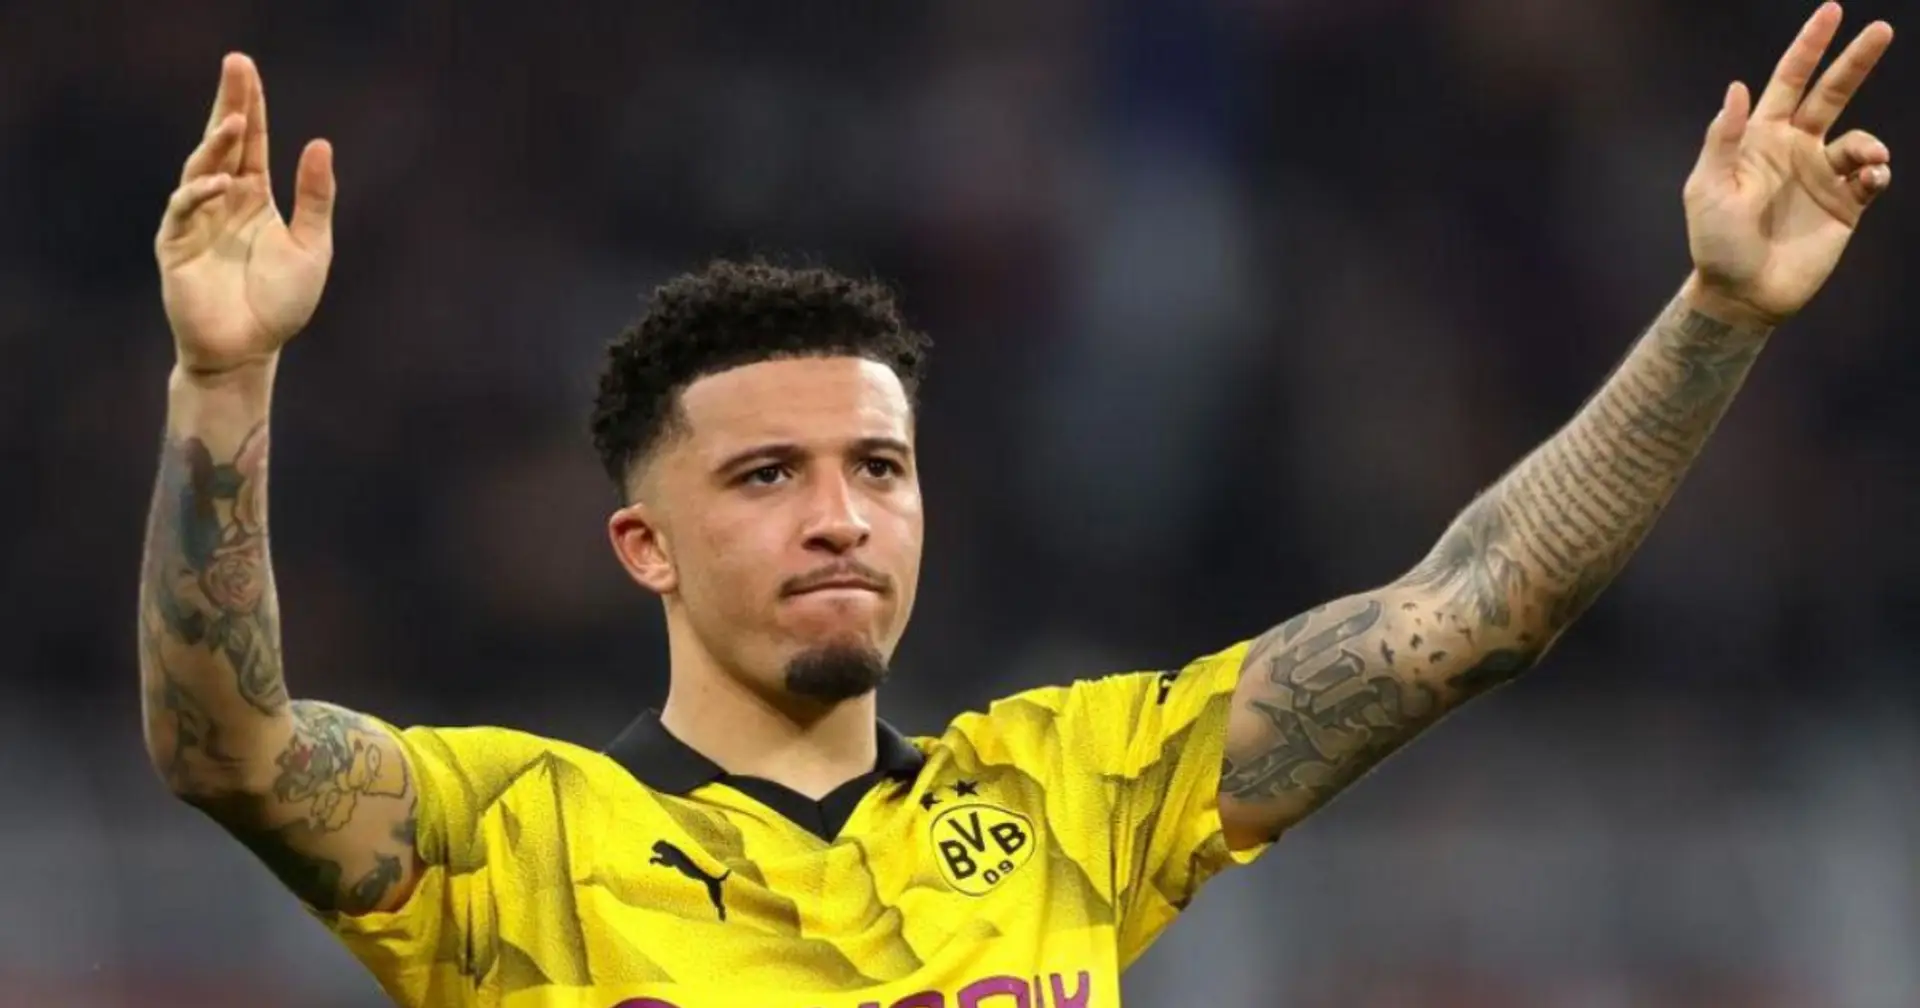 'He's not doing anything a £75m+ winger should be doing': Man United fans not impressed by Jadon Sancho